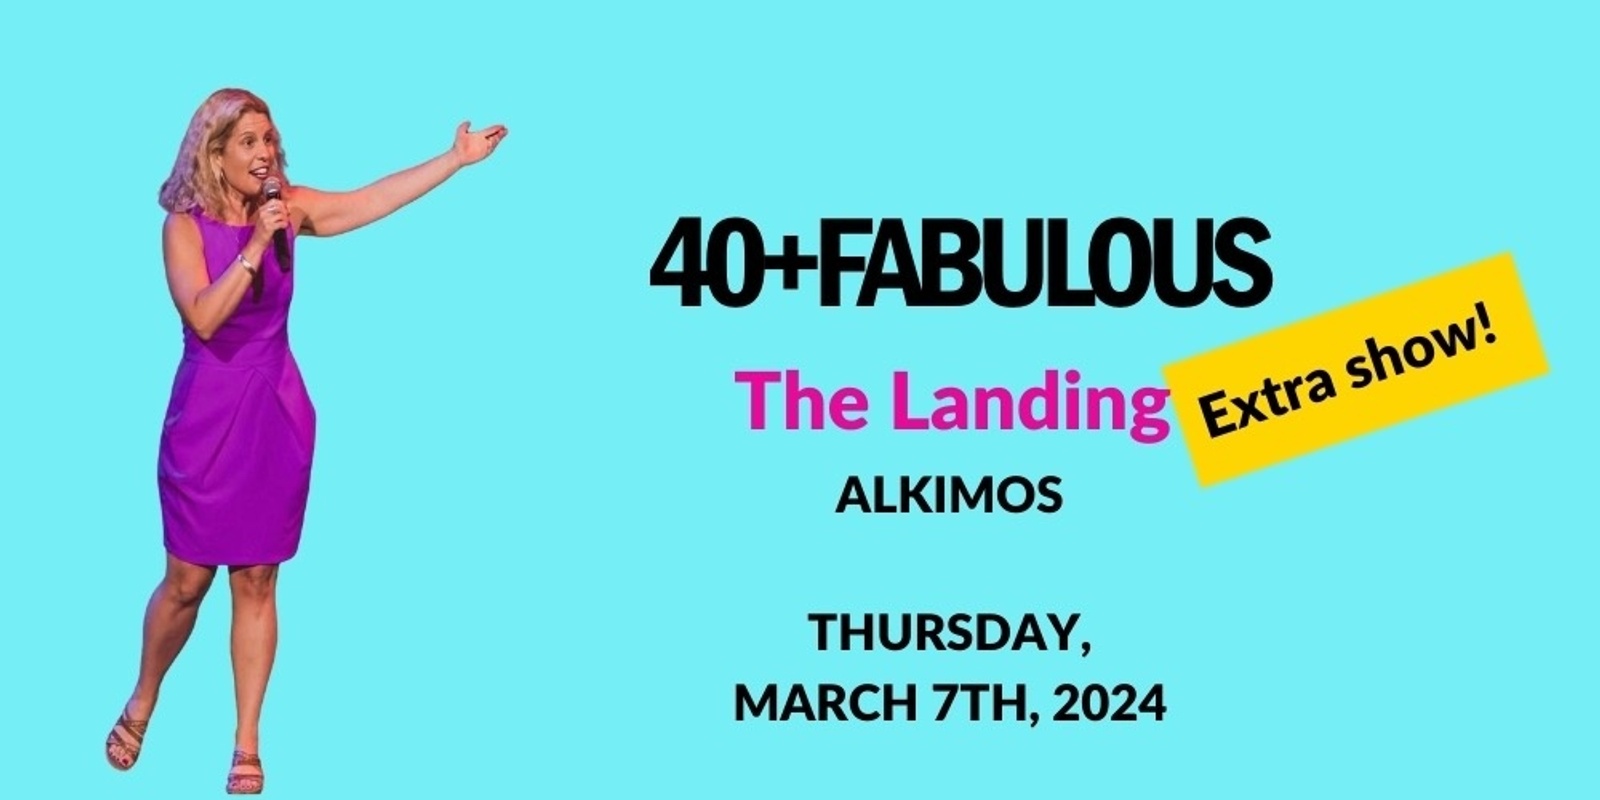 Banner image for EXTRA SHOW! 6pm - 40+Fabulous - The Landing, Alkimos